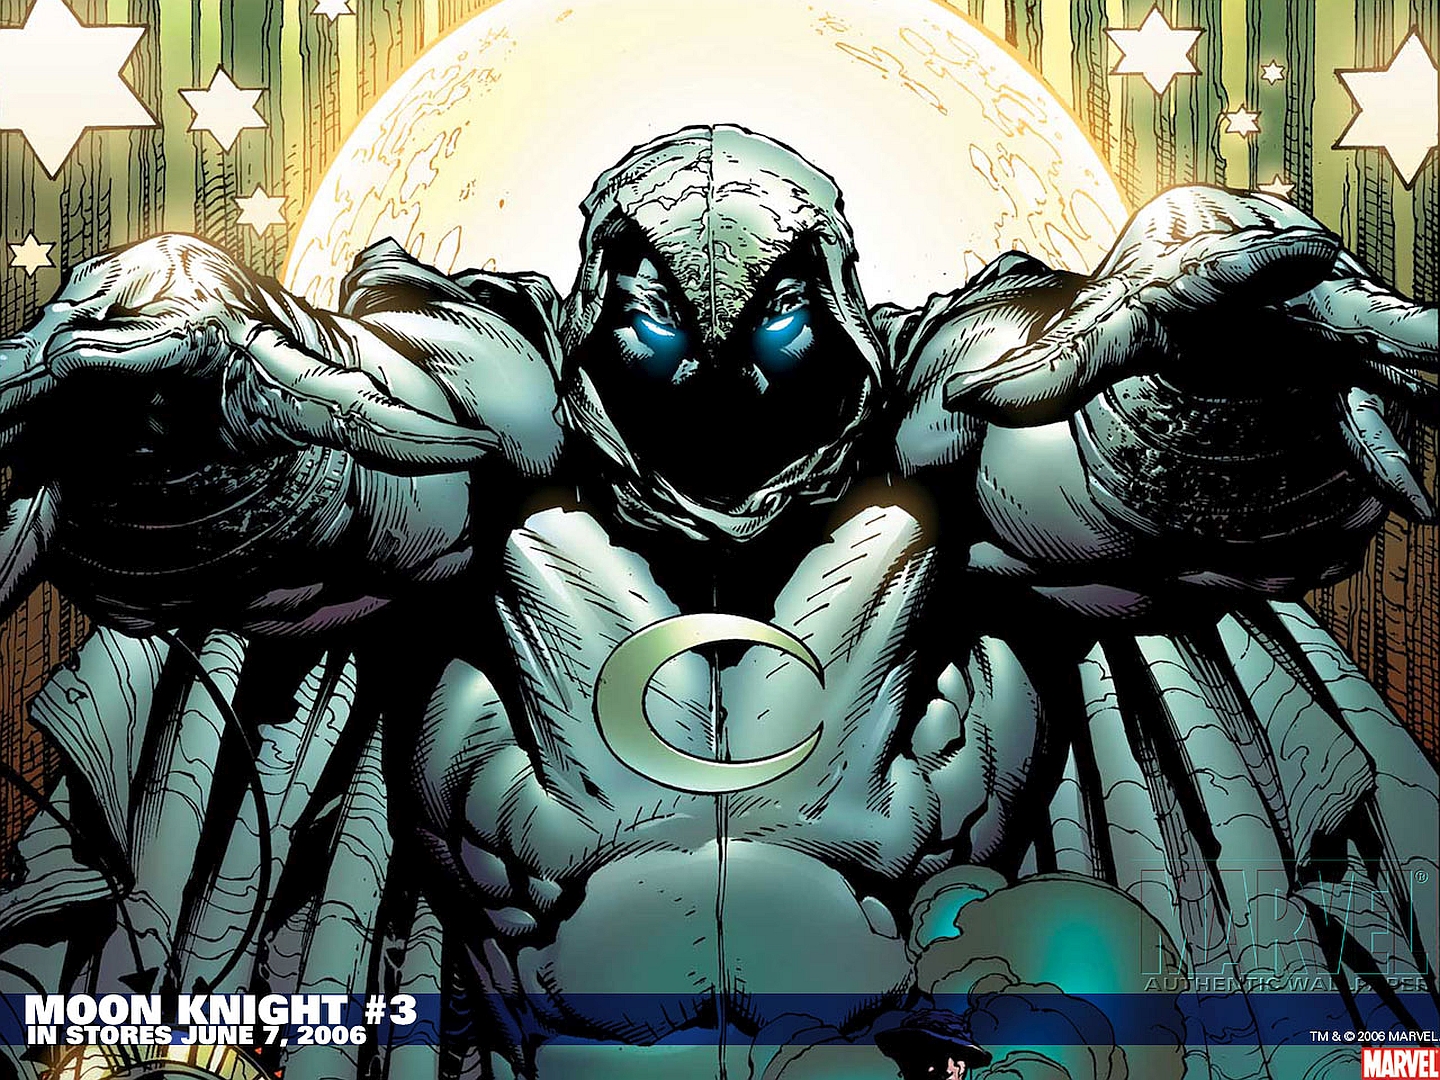 Wallpaper comics, moon knight, moon knight for mobile and desktop, section  фантастика, resolution 1920x1080 - download